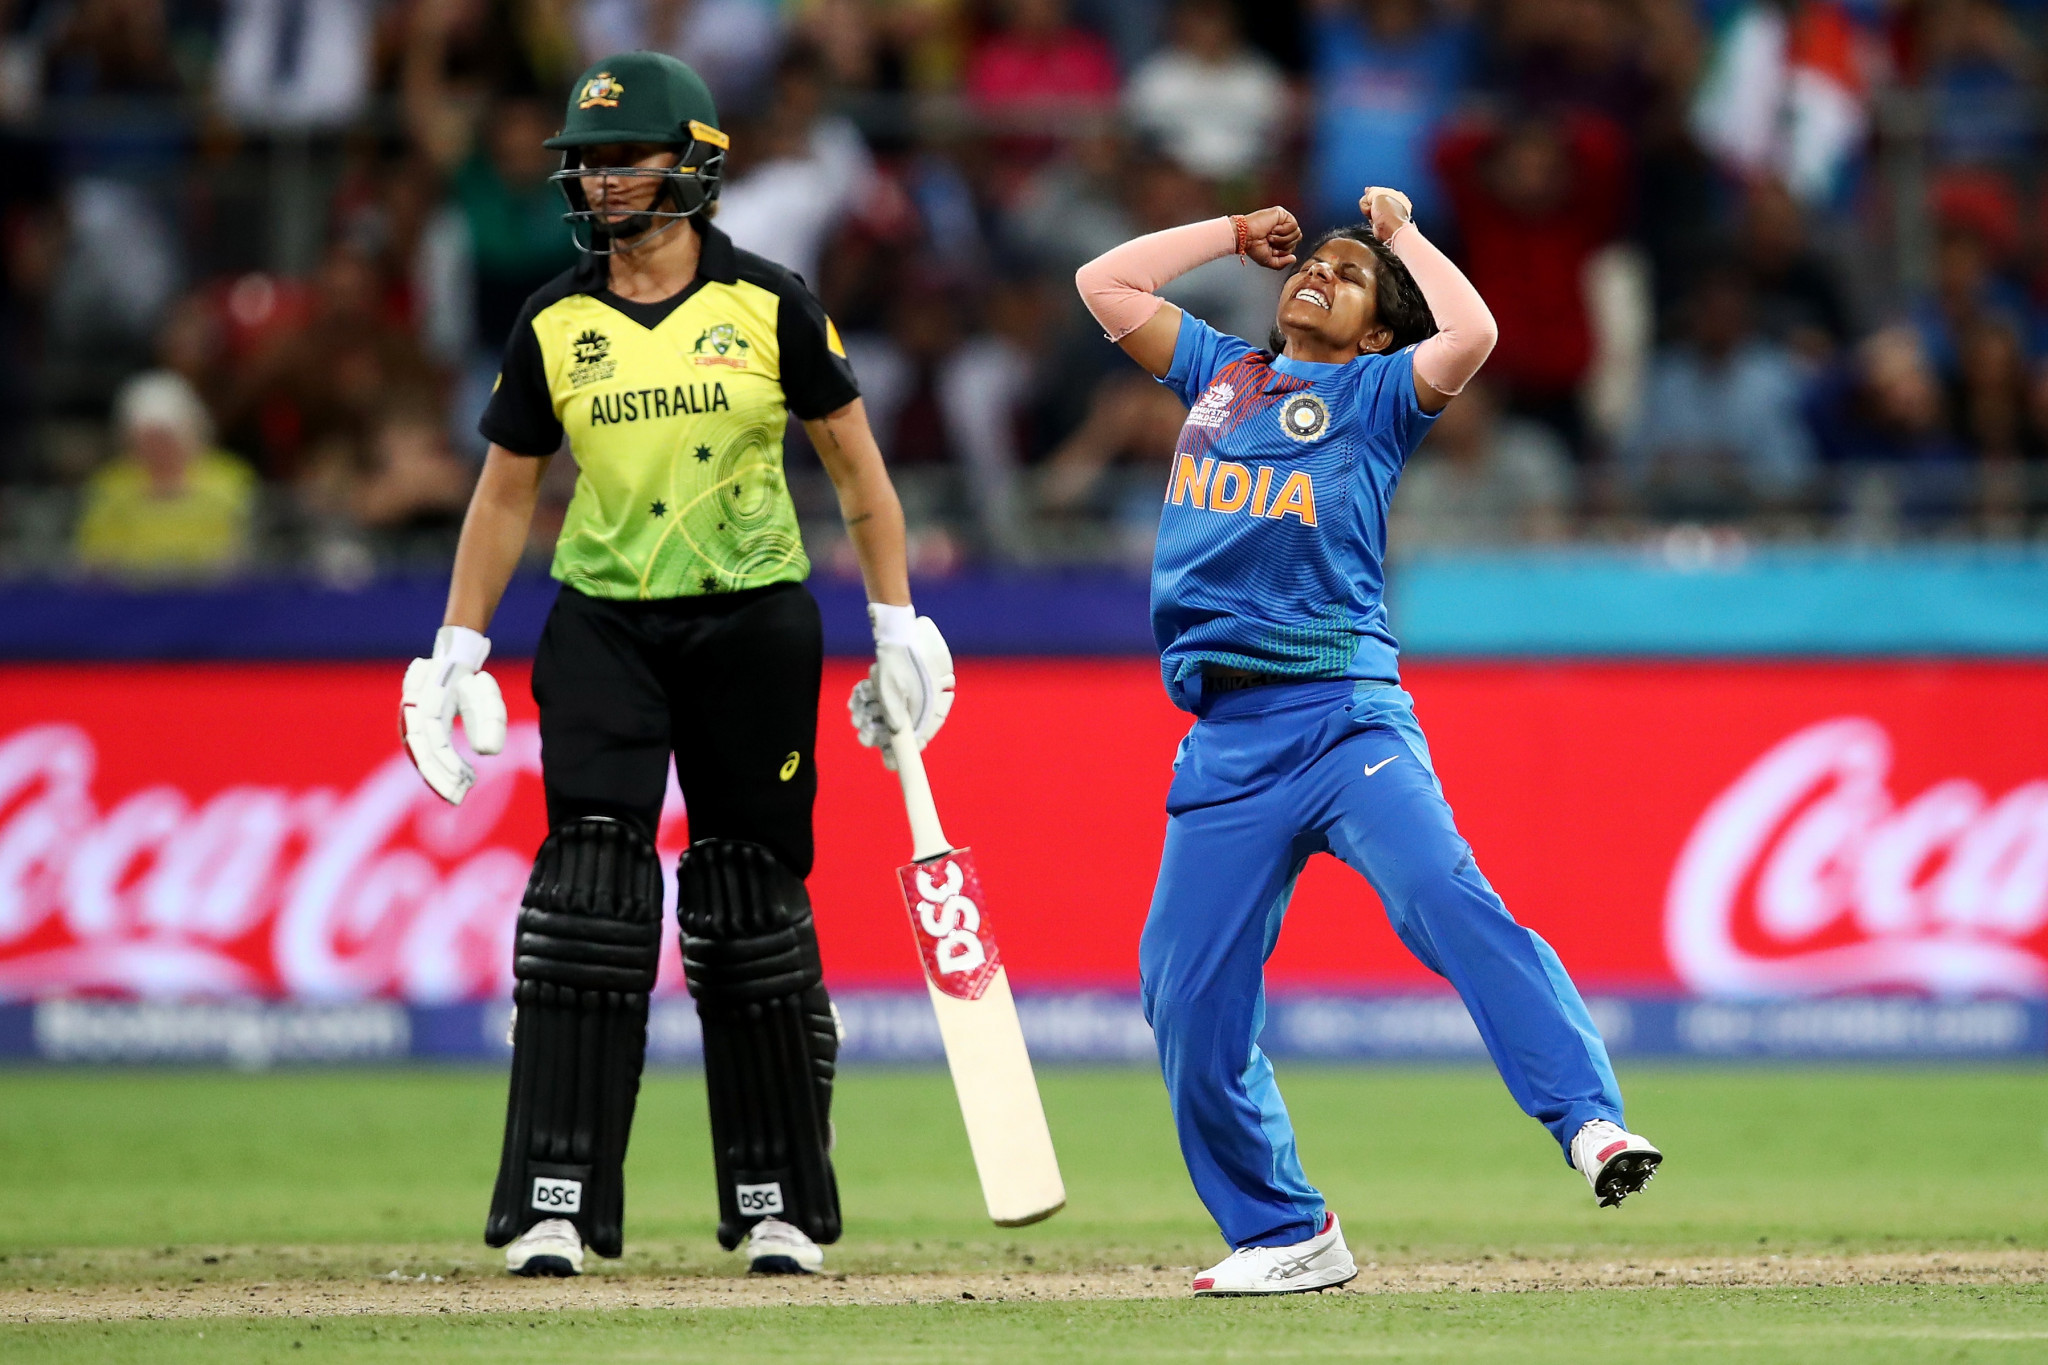 Spinner Poonam Yadav guided India to victory against Australia ©Getty Images